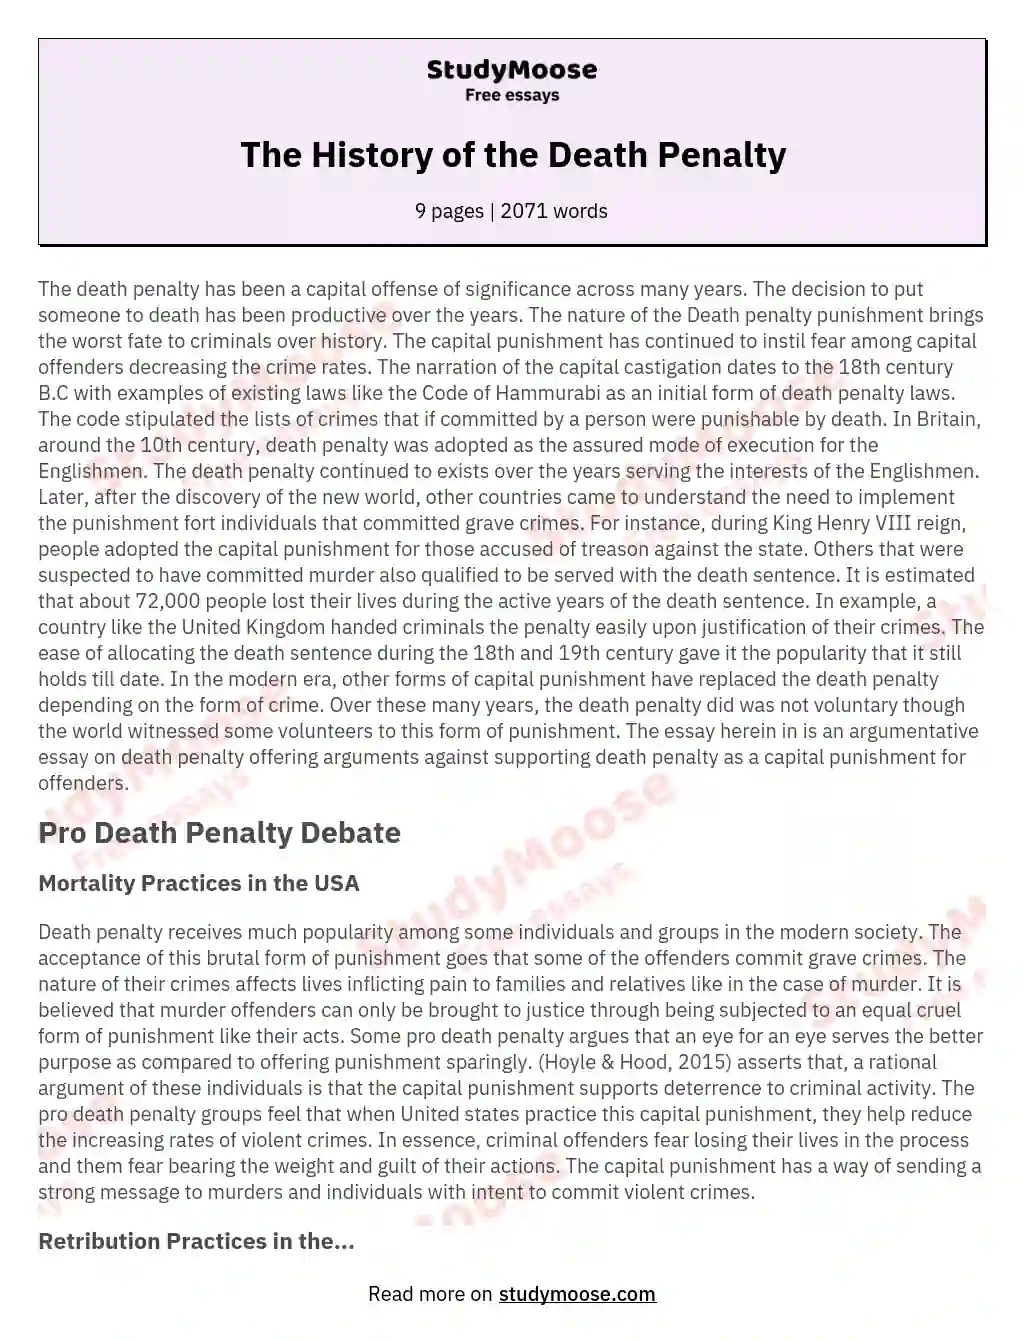 The History of the Death Penalty